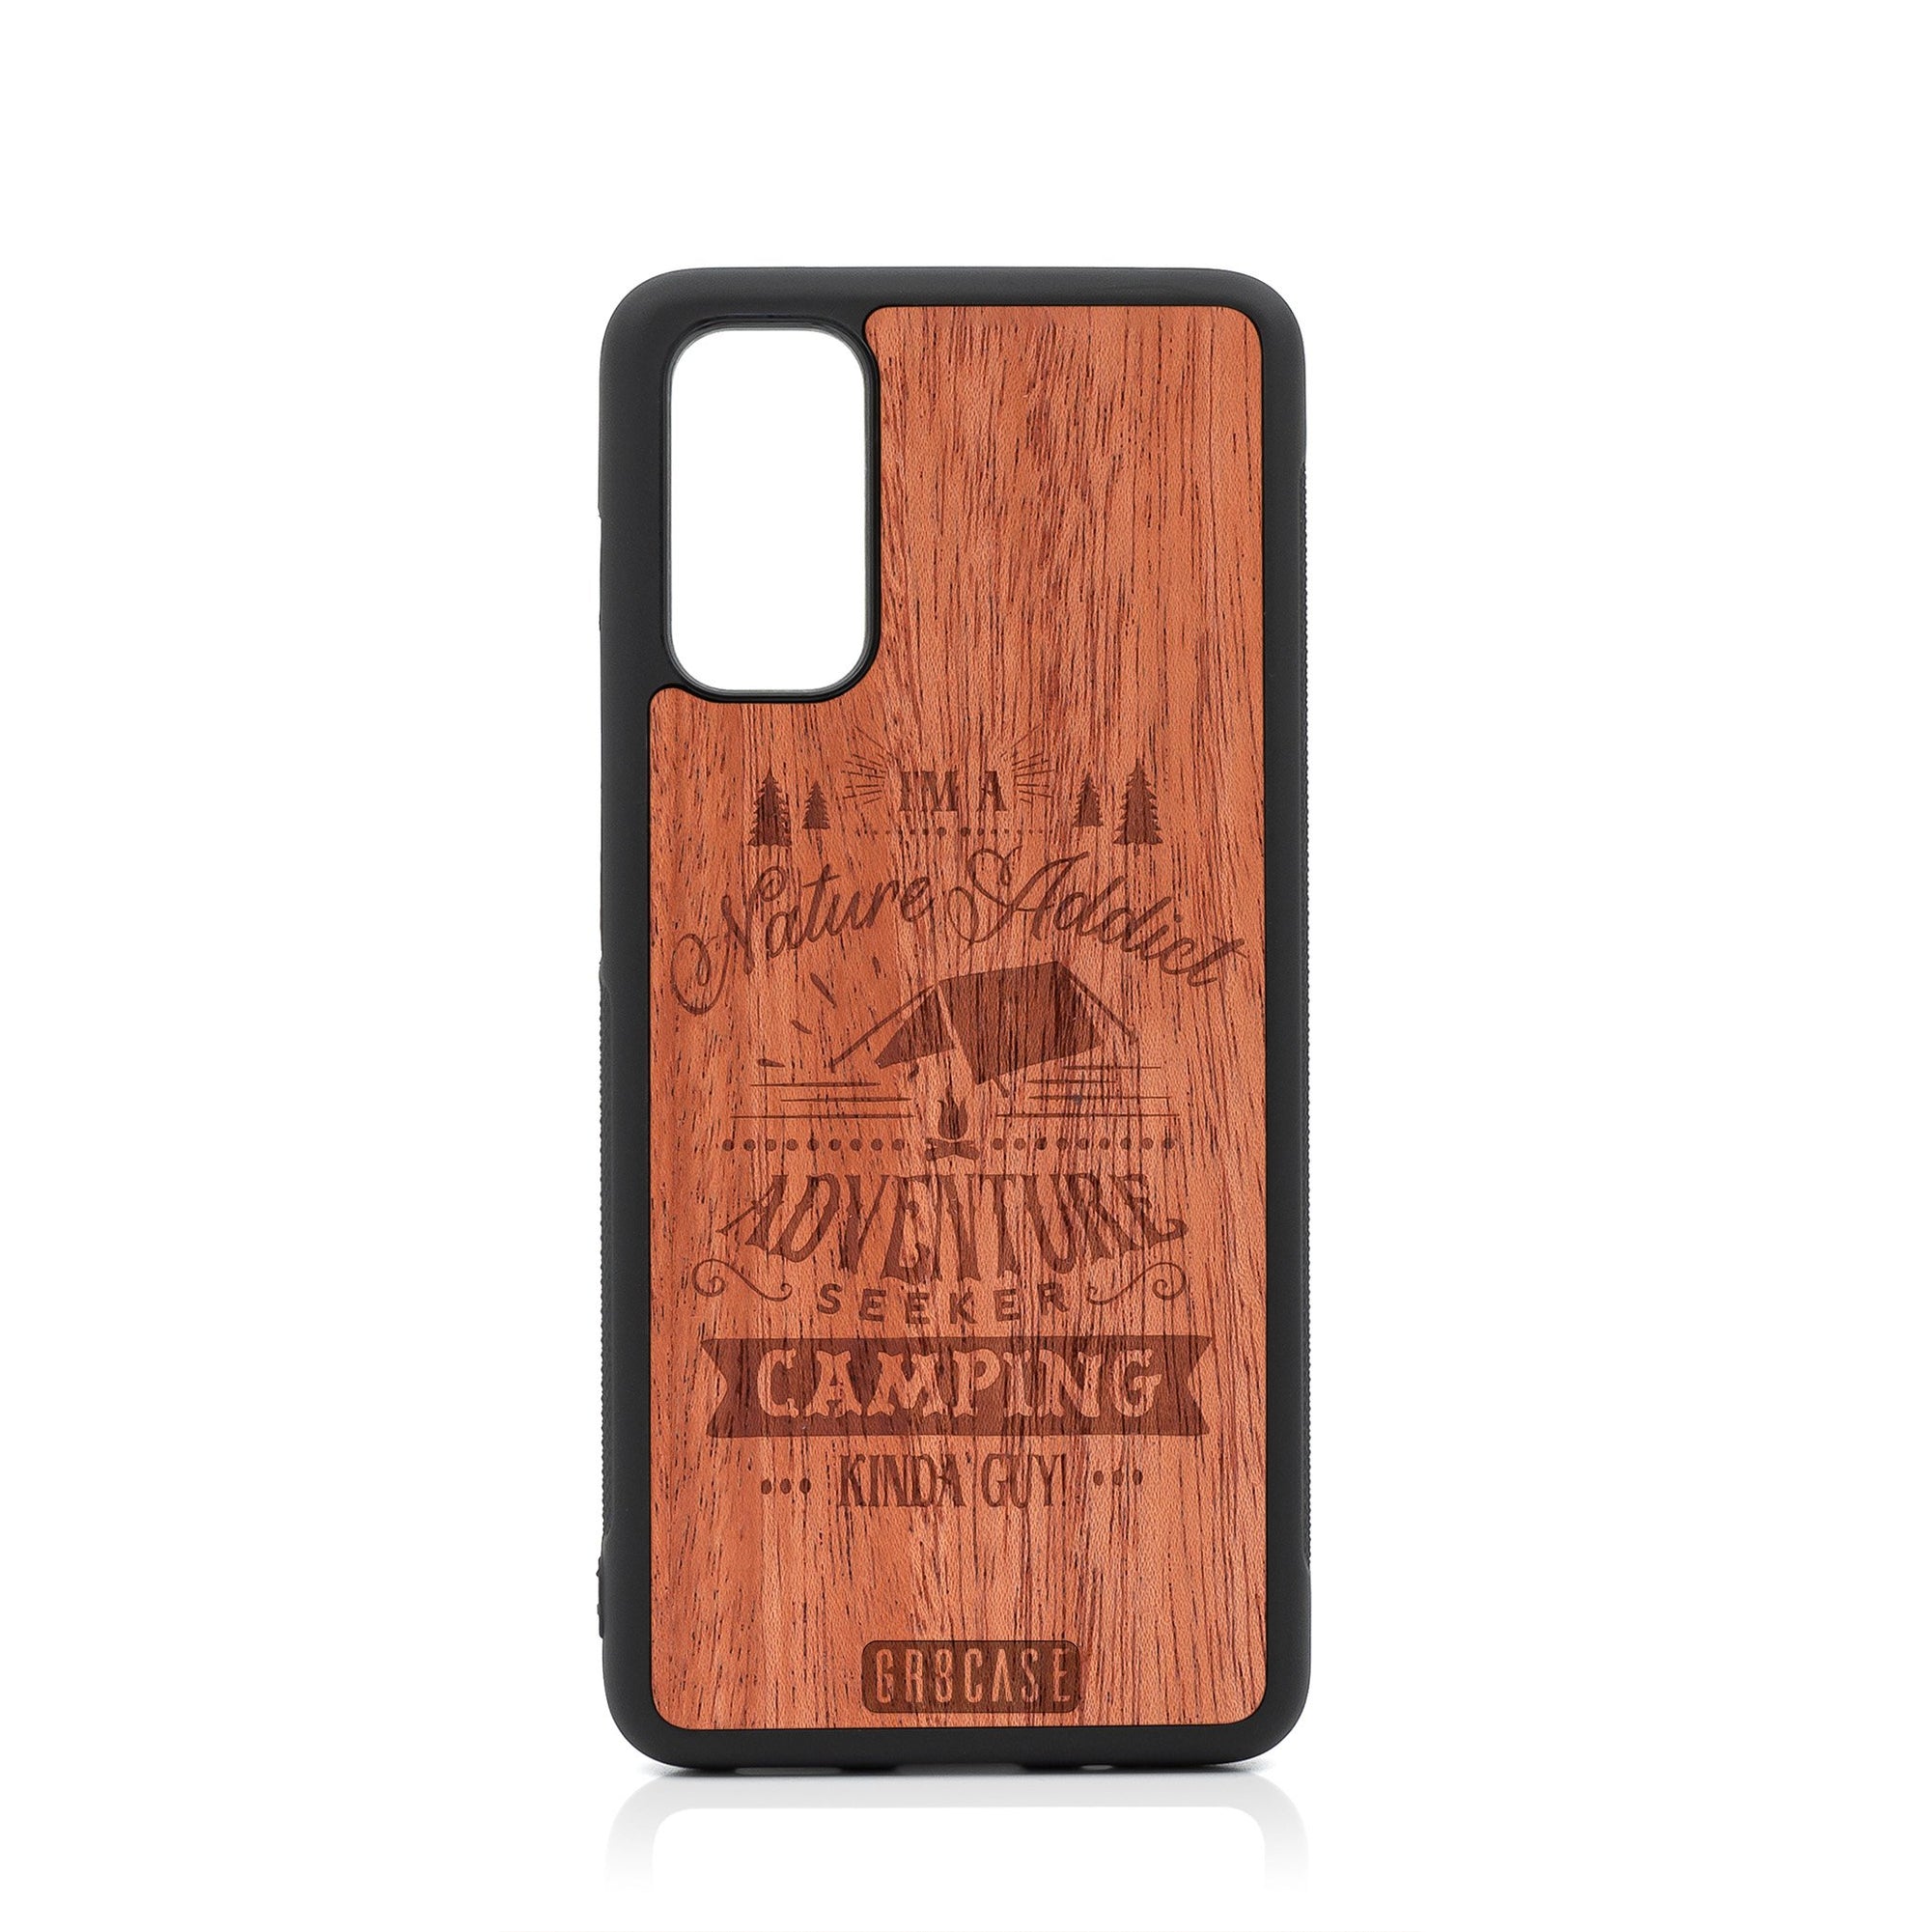 I'm A Nature Addict Adventure Seeker Camping Kinda Guy Design Wood Case For Samsung Galaxy S20 FE 5G by GR8CASE